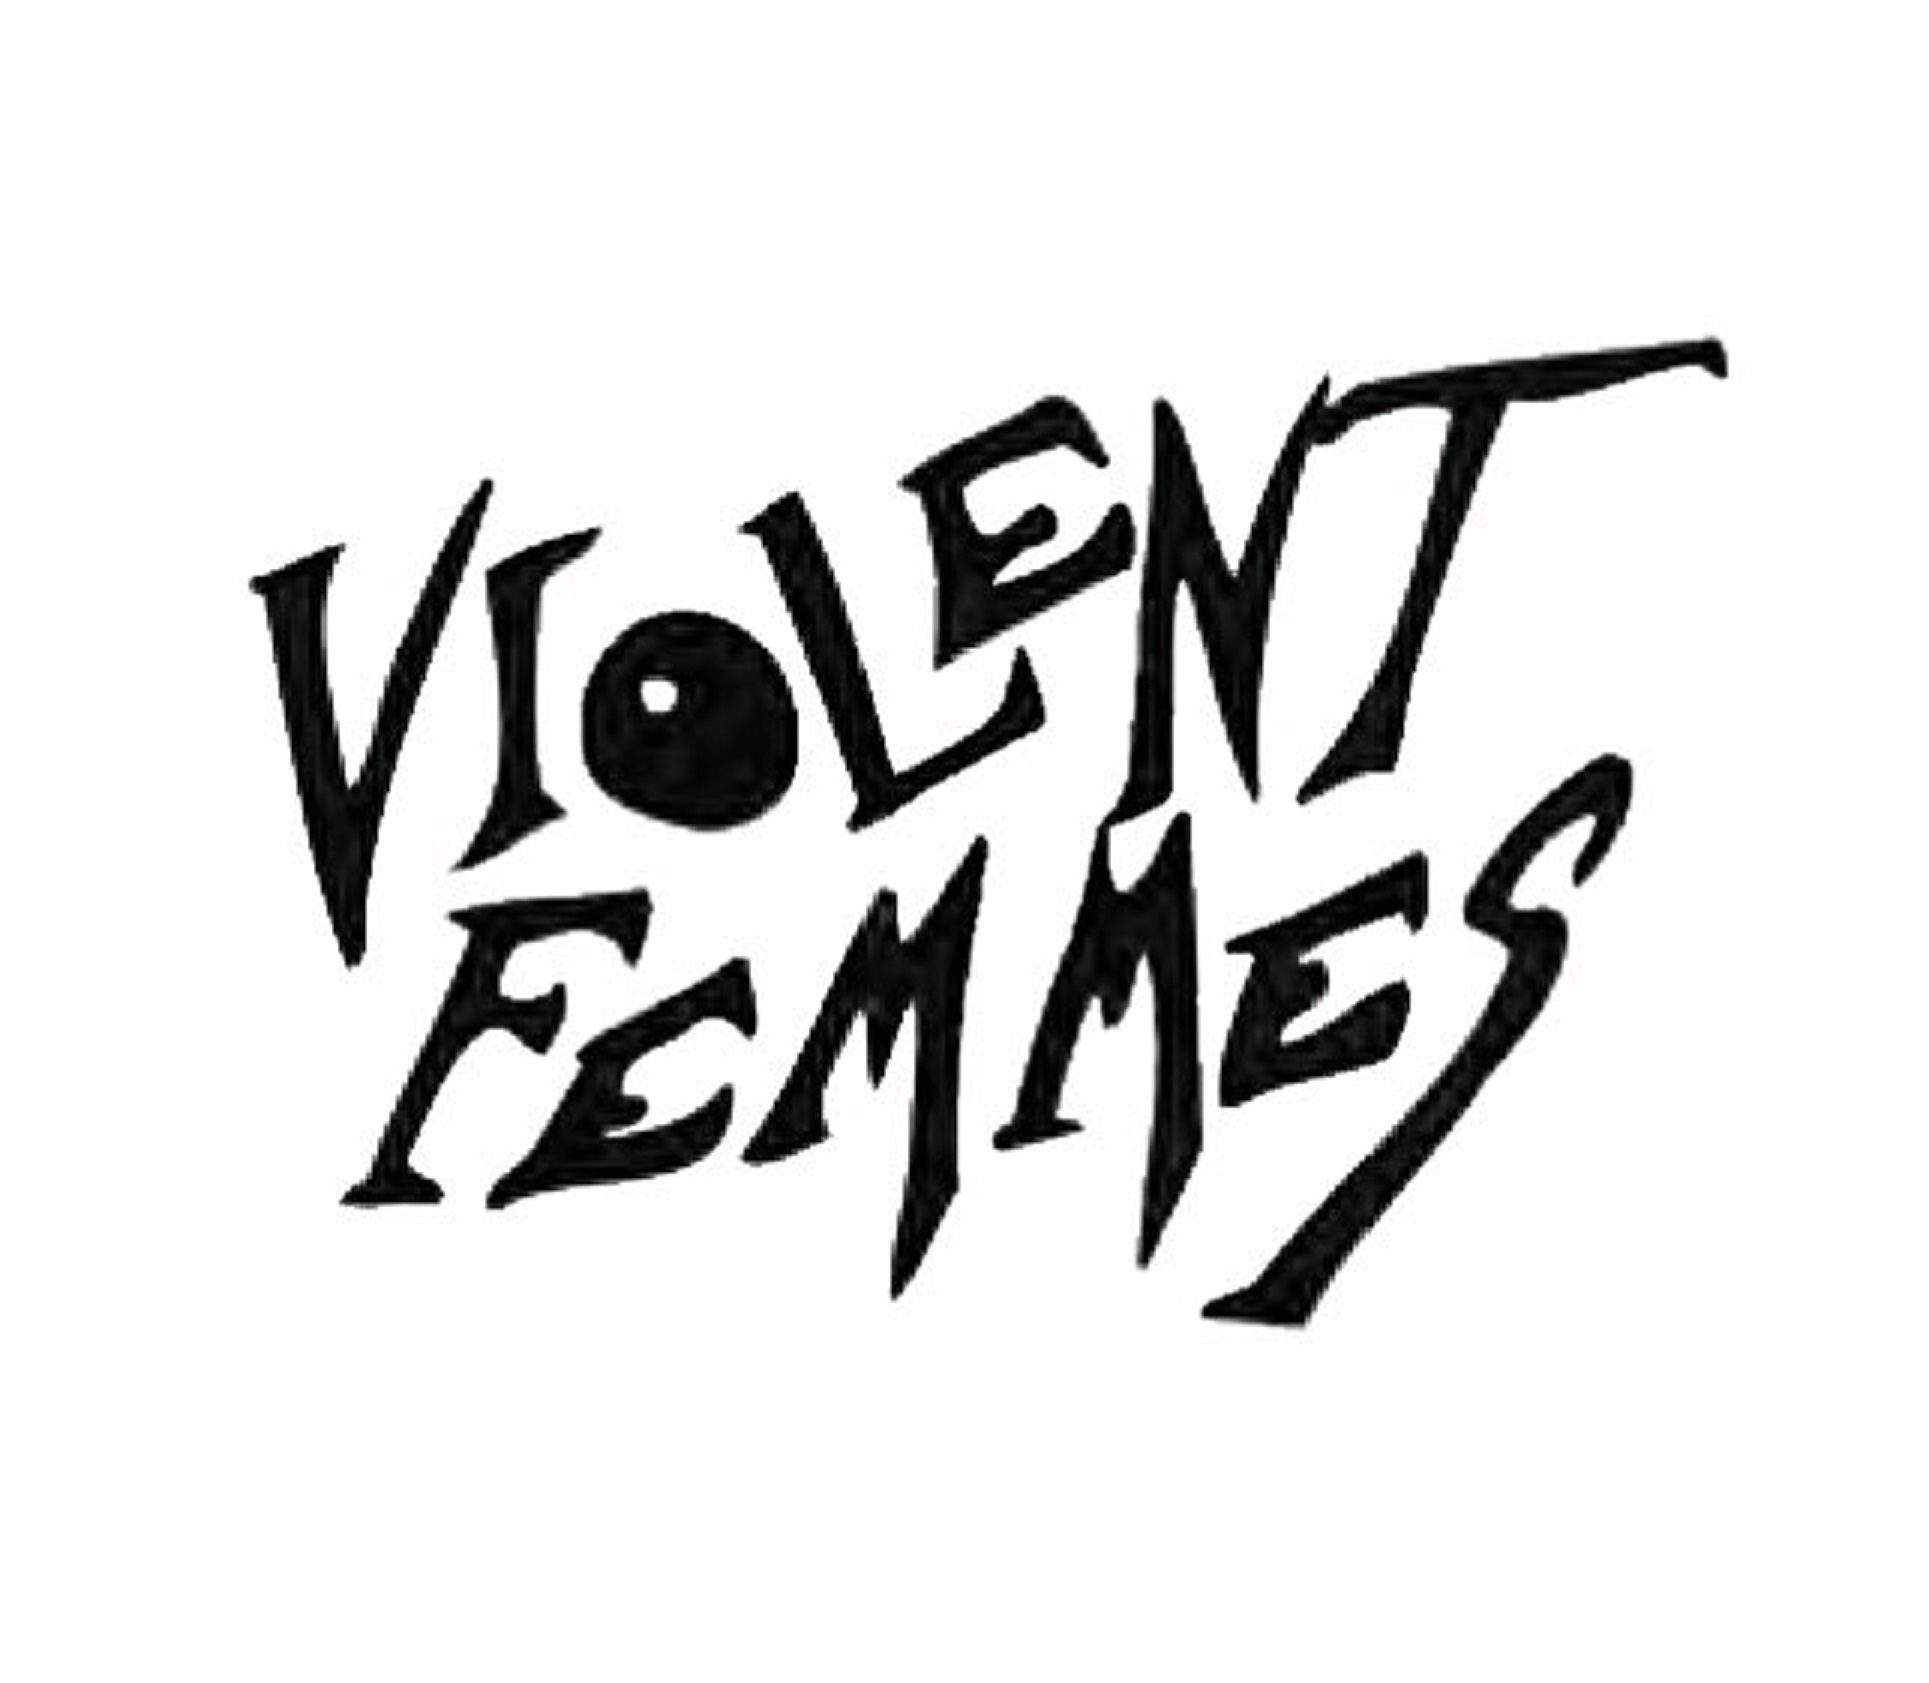 Influential Alt Band Violent Femmes to Perform Their Iconic First Two Albums Each Night During Fall Tour